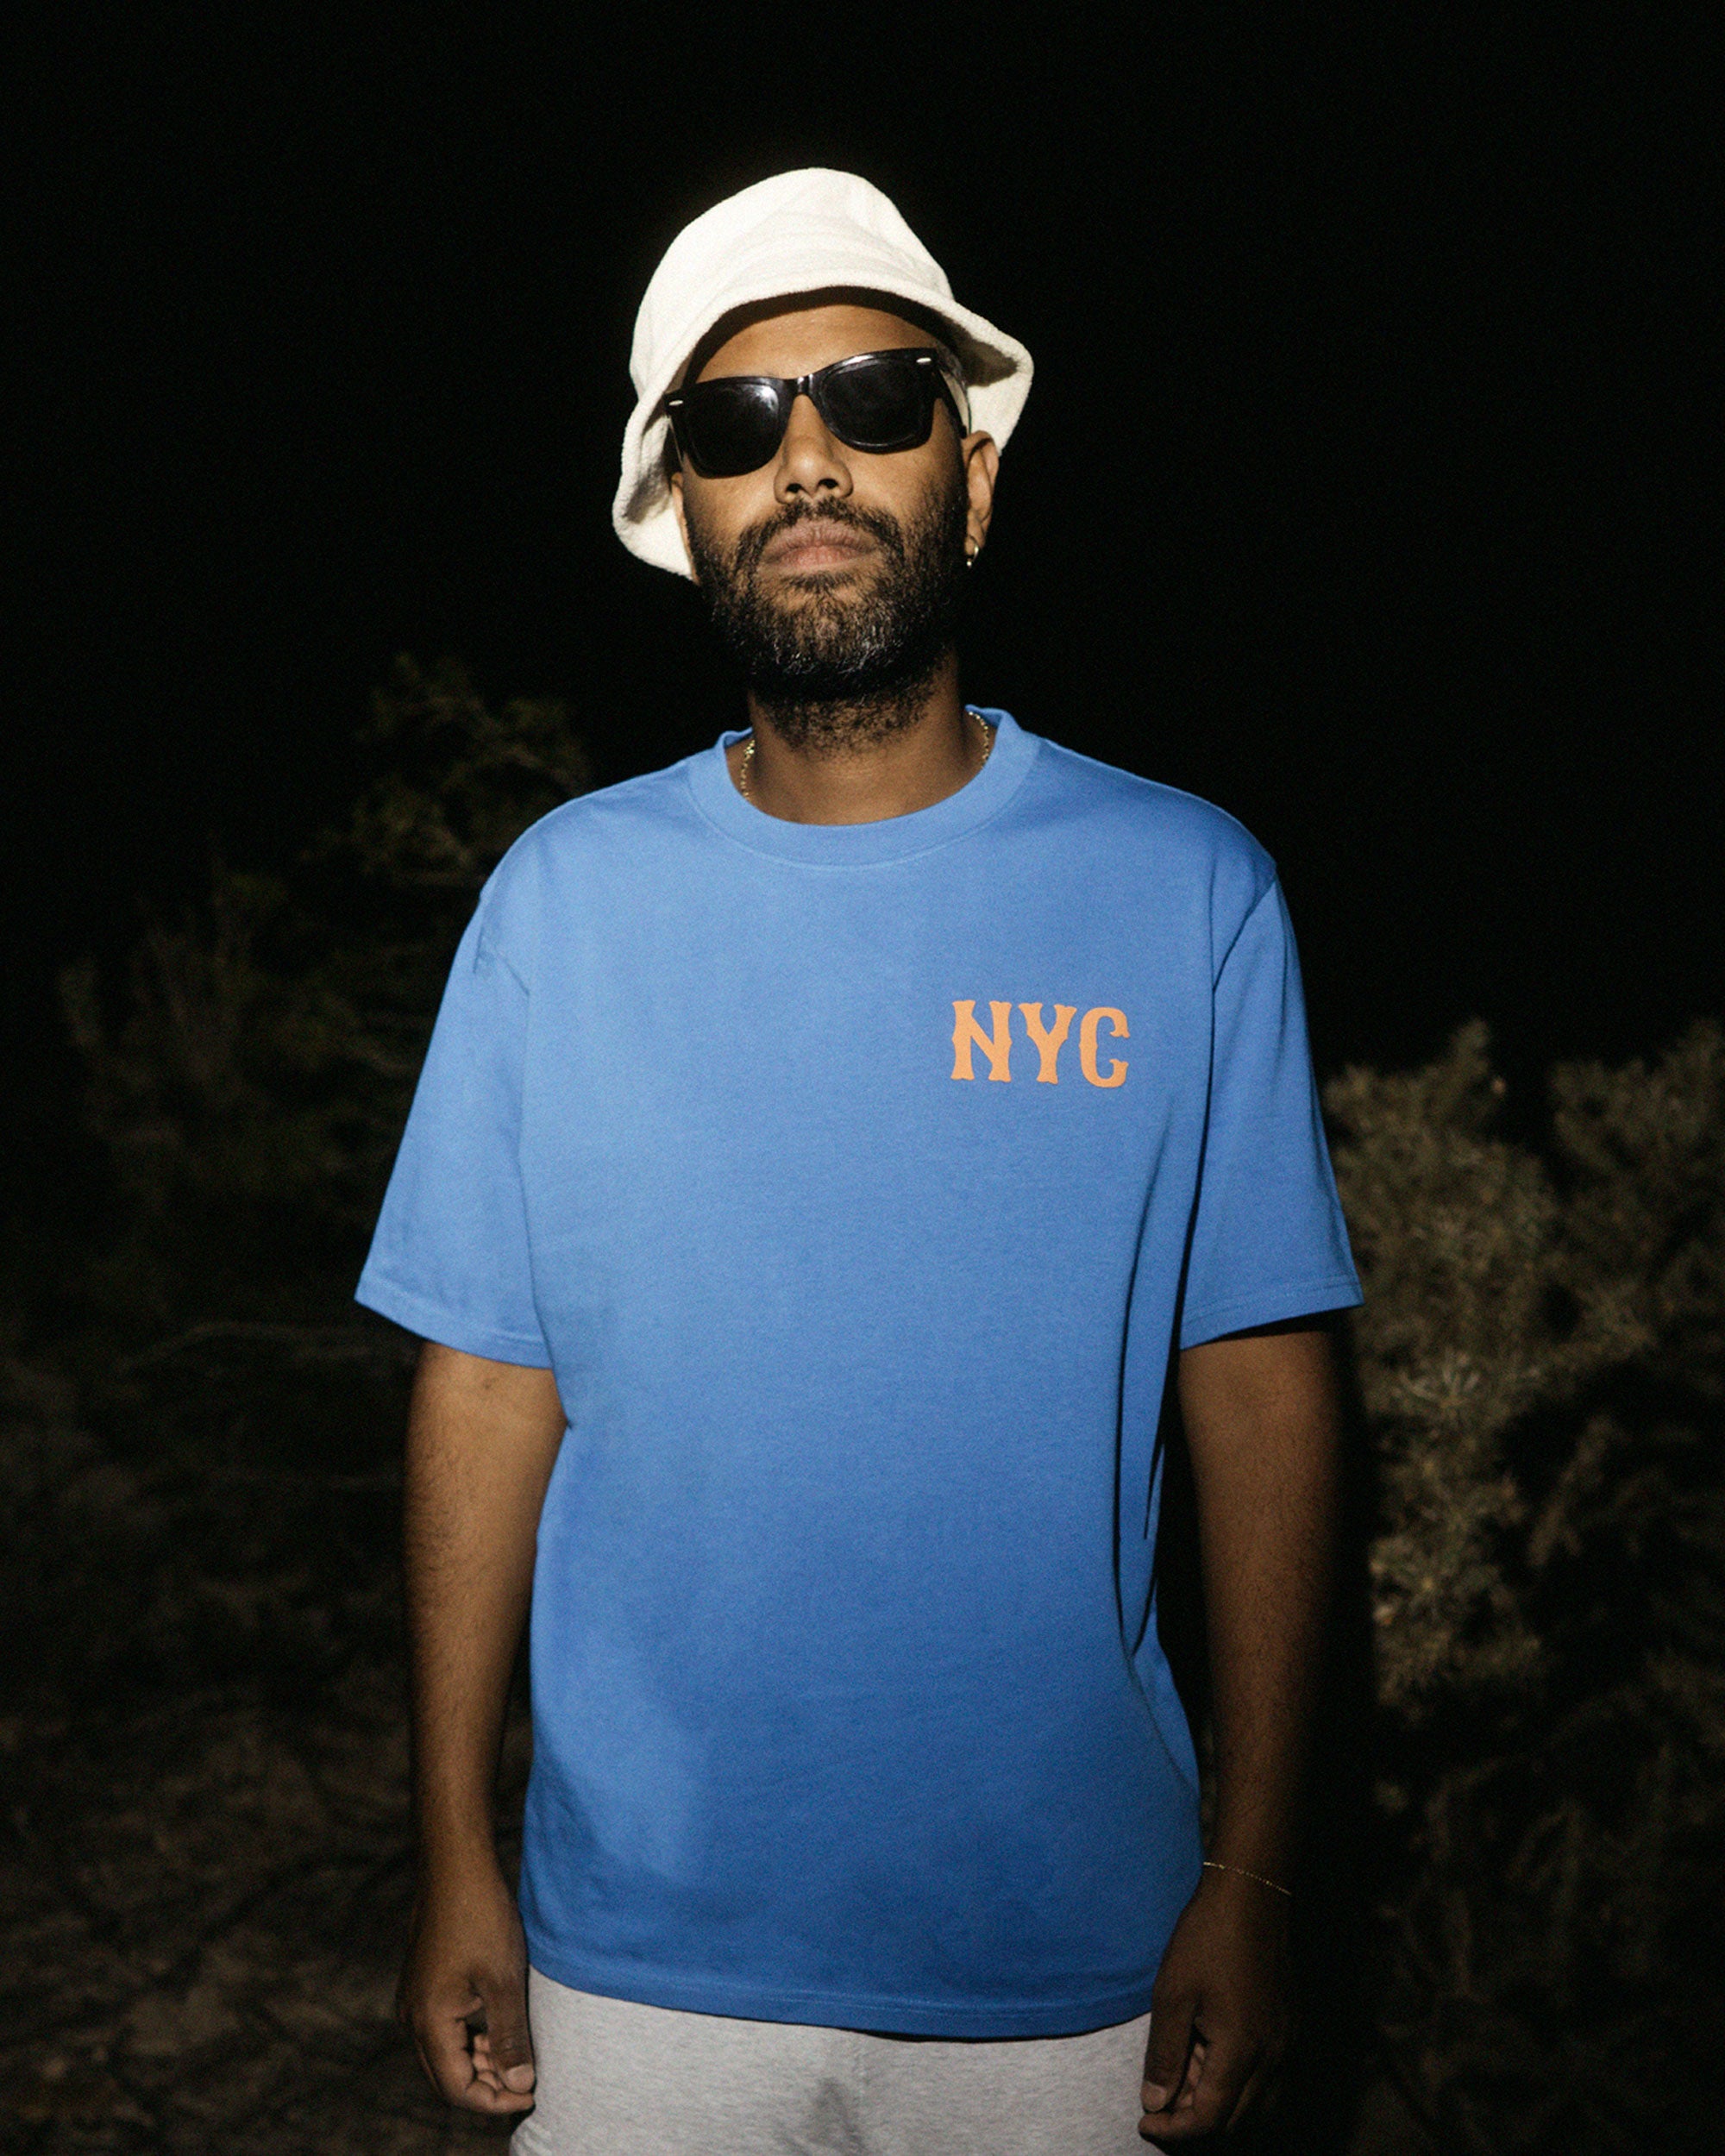 Male model wearing a blue t-shirt with orange 